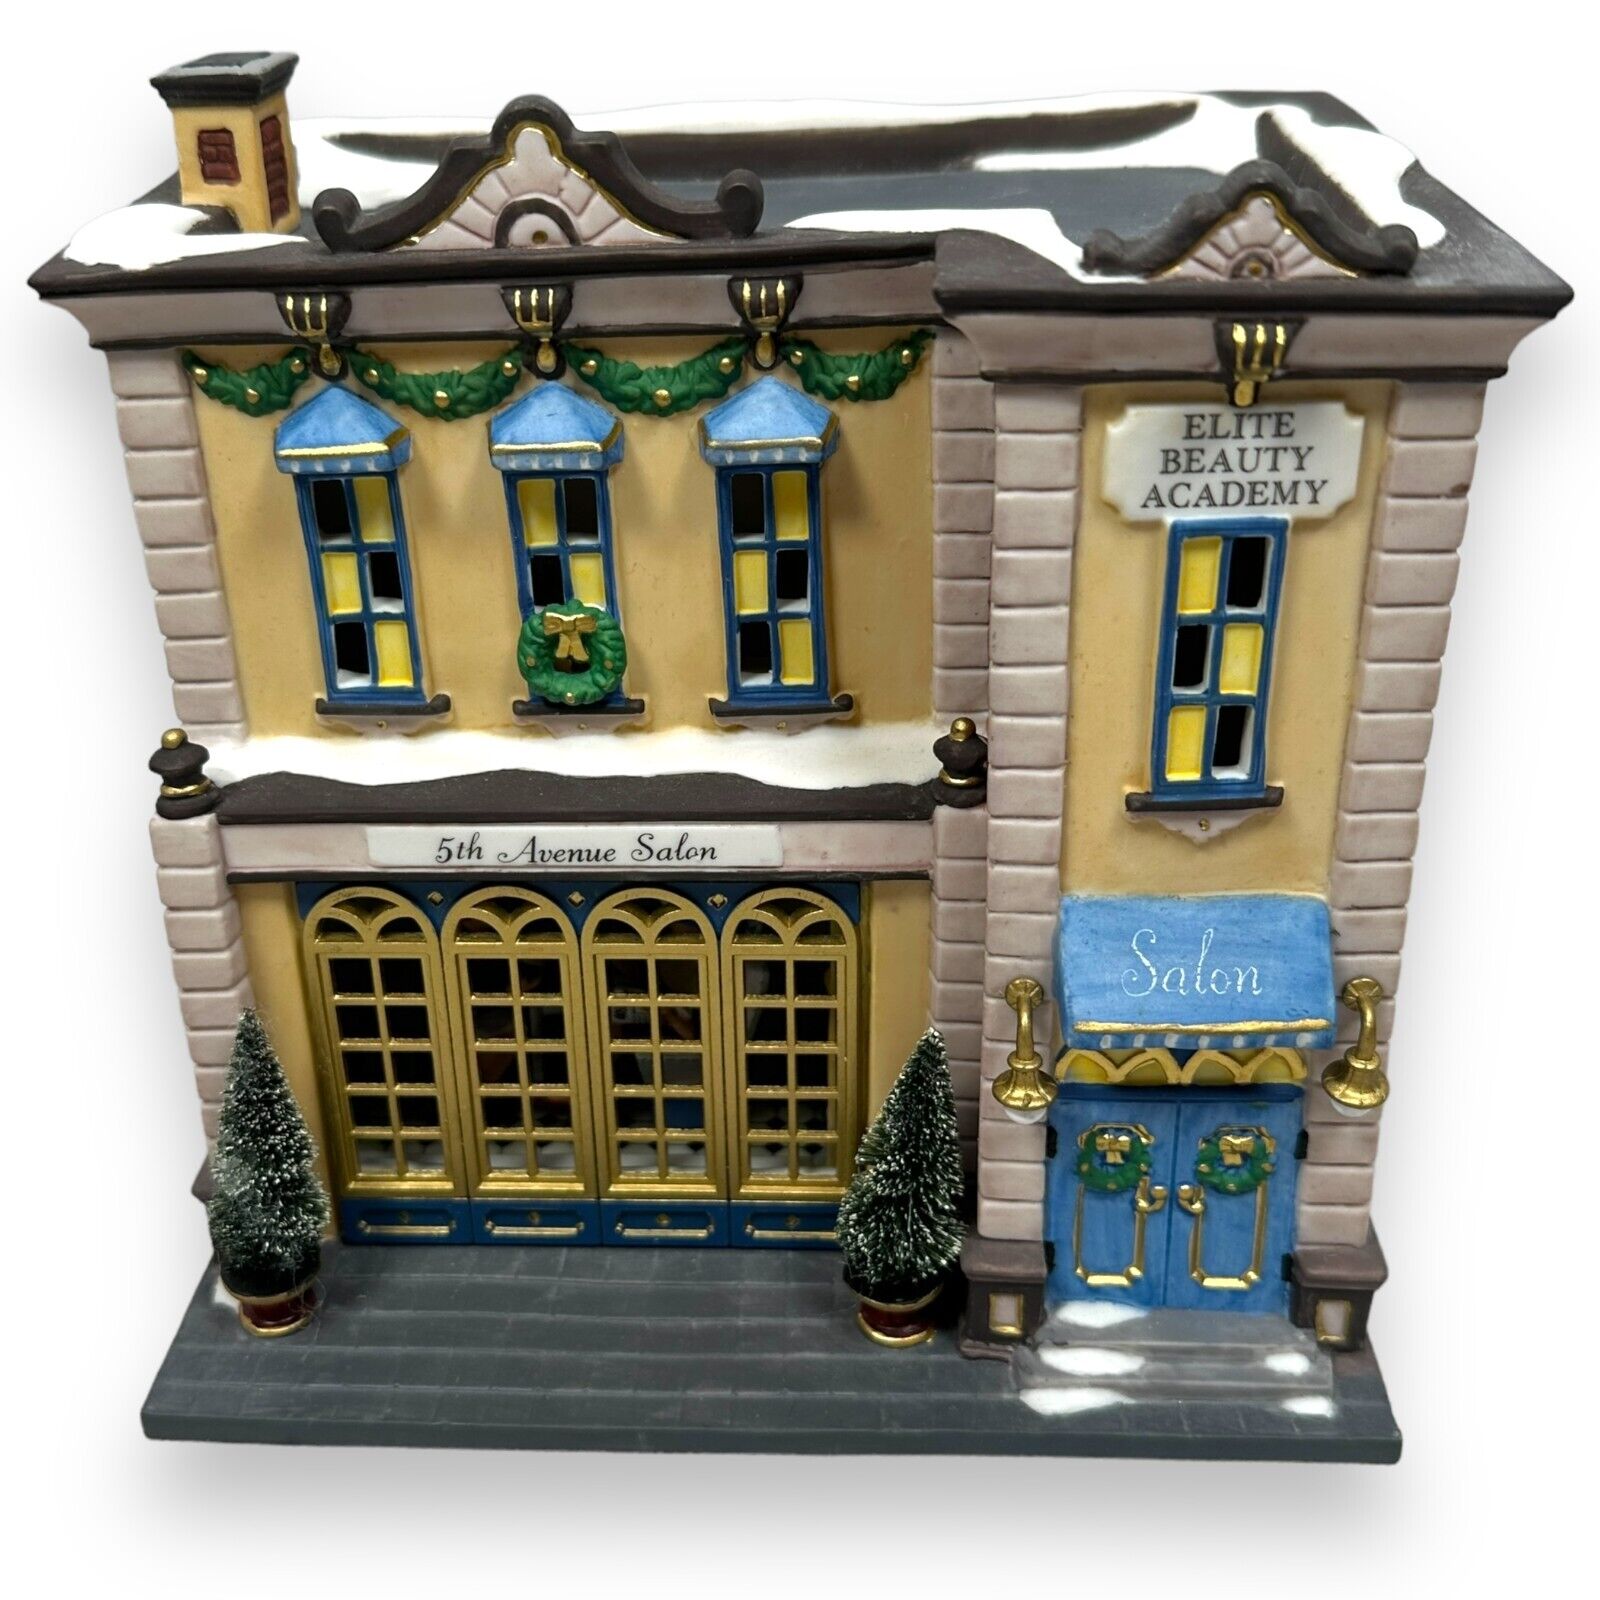 Department 56 Village Christmas In The City Series 5th Avenue Salon 58950 Dept